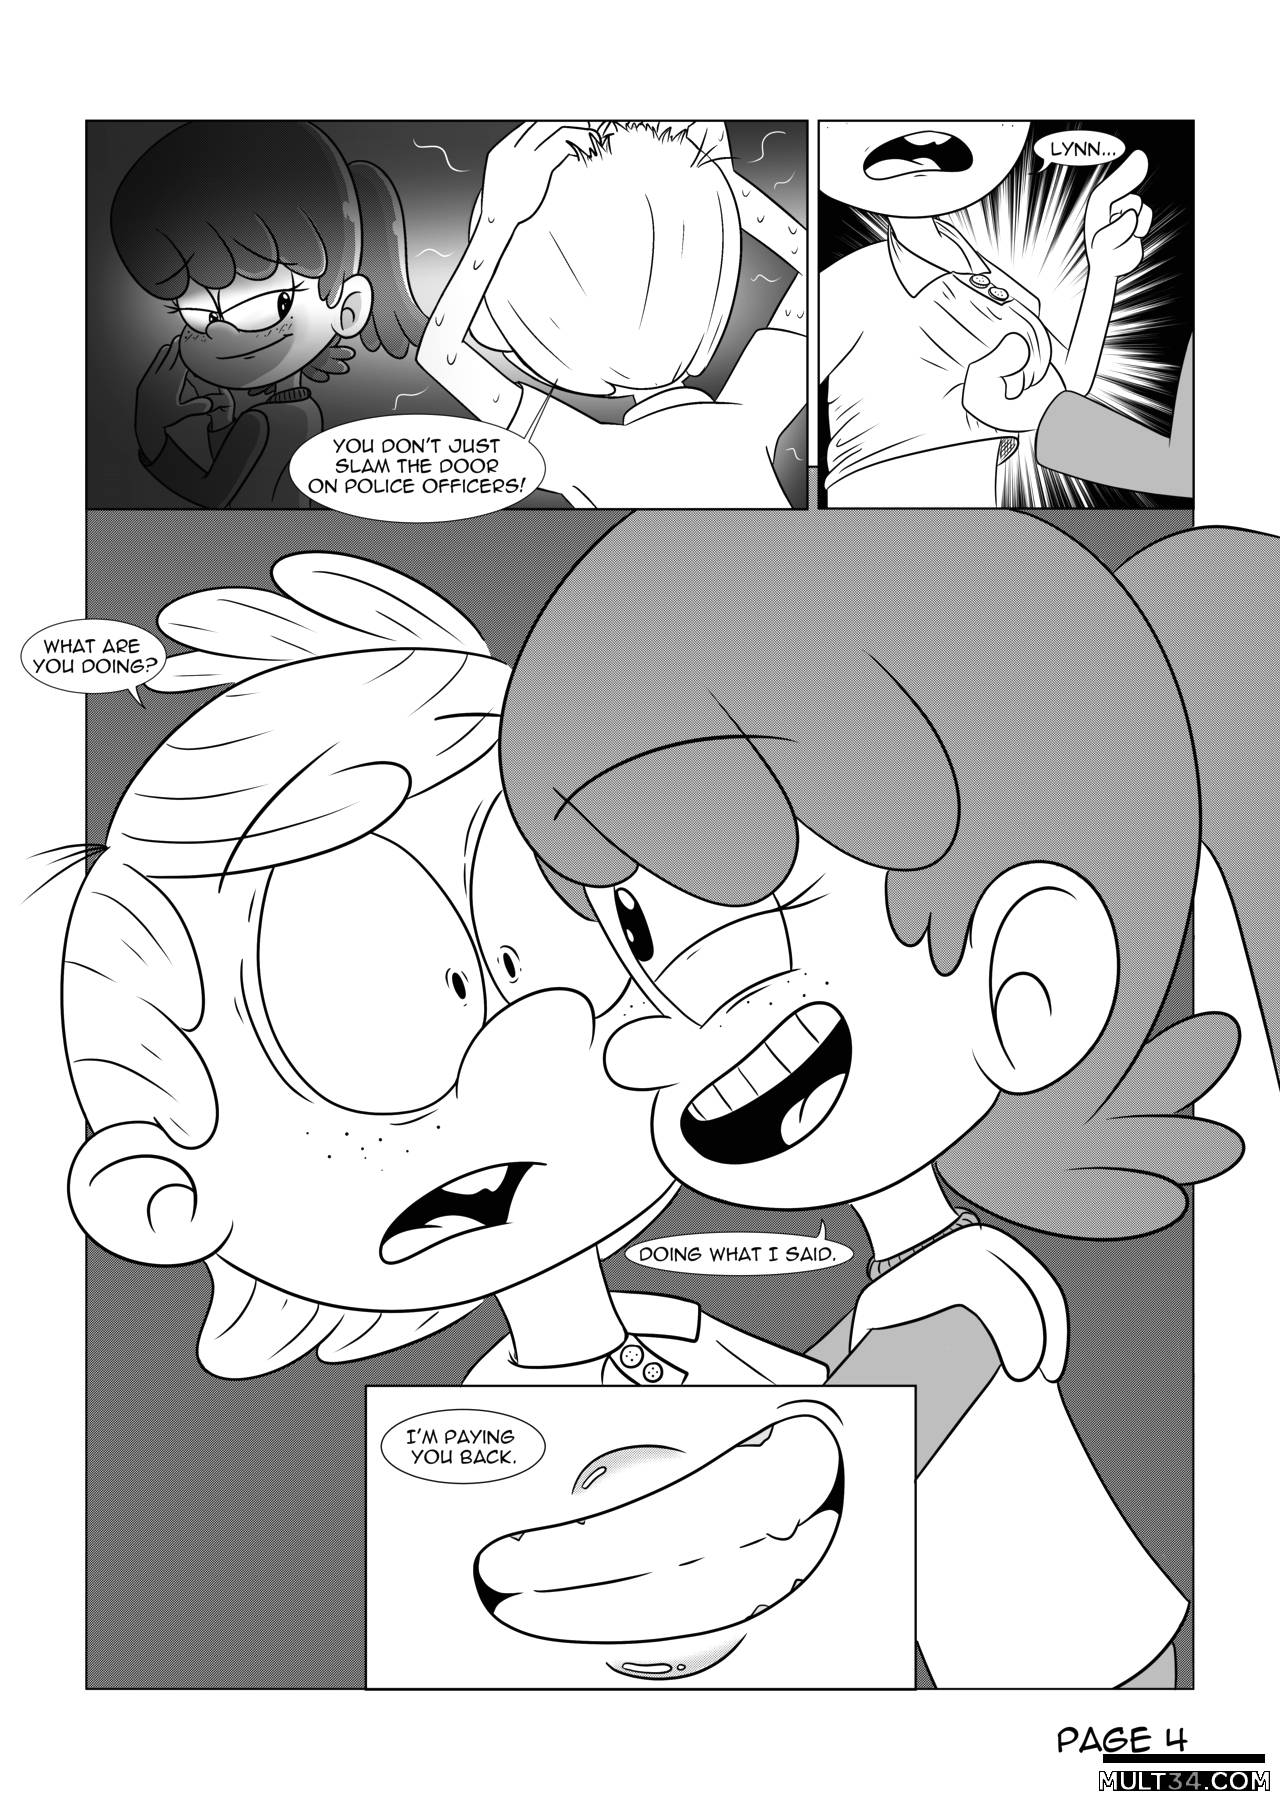 The loud house comic, chapter 3 page 5